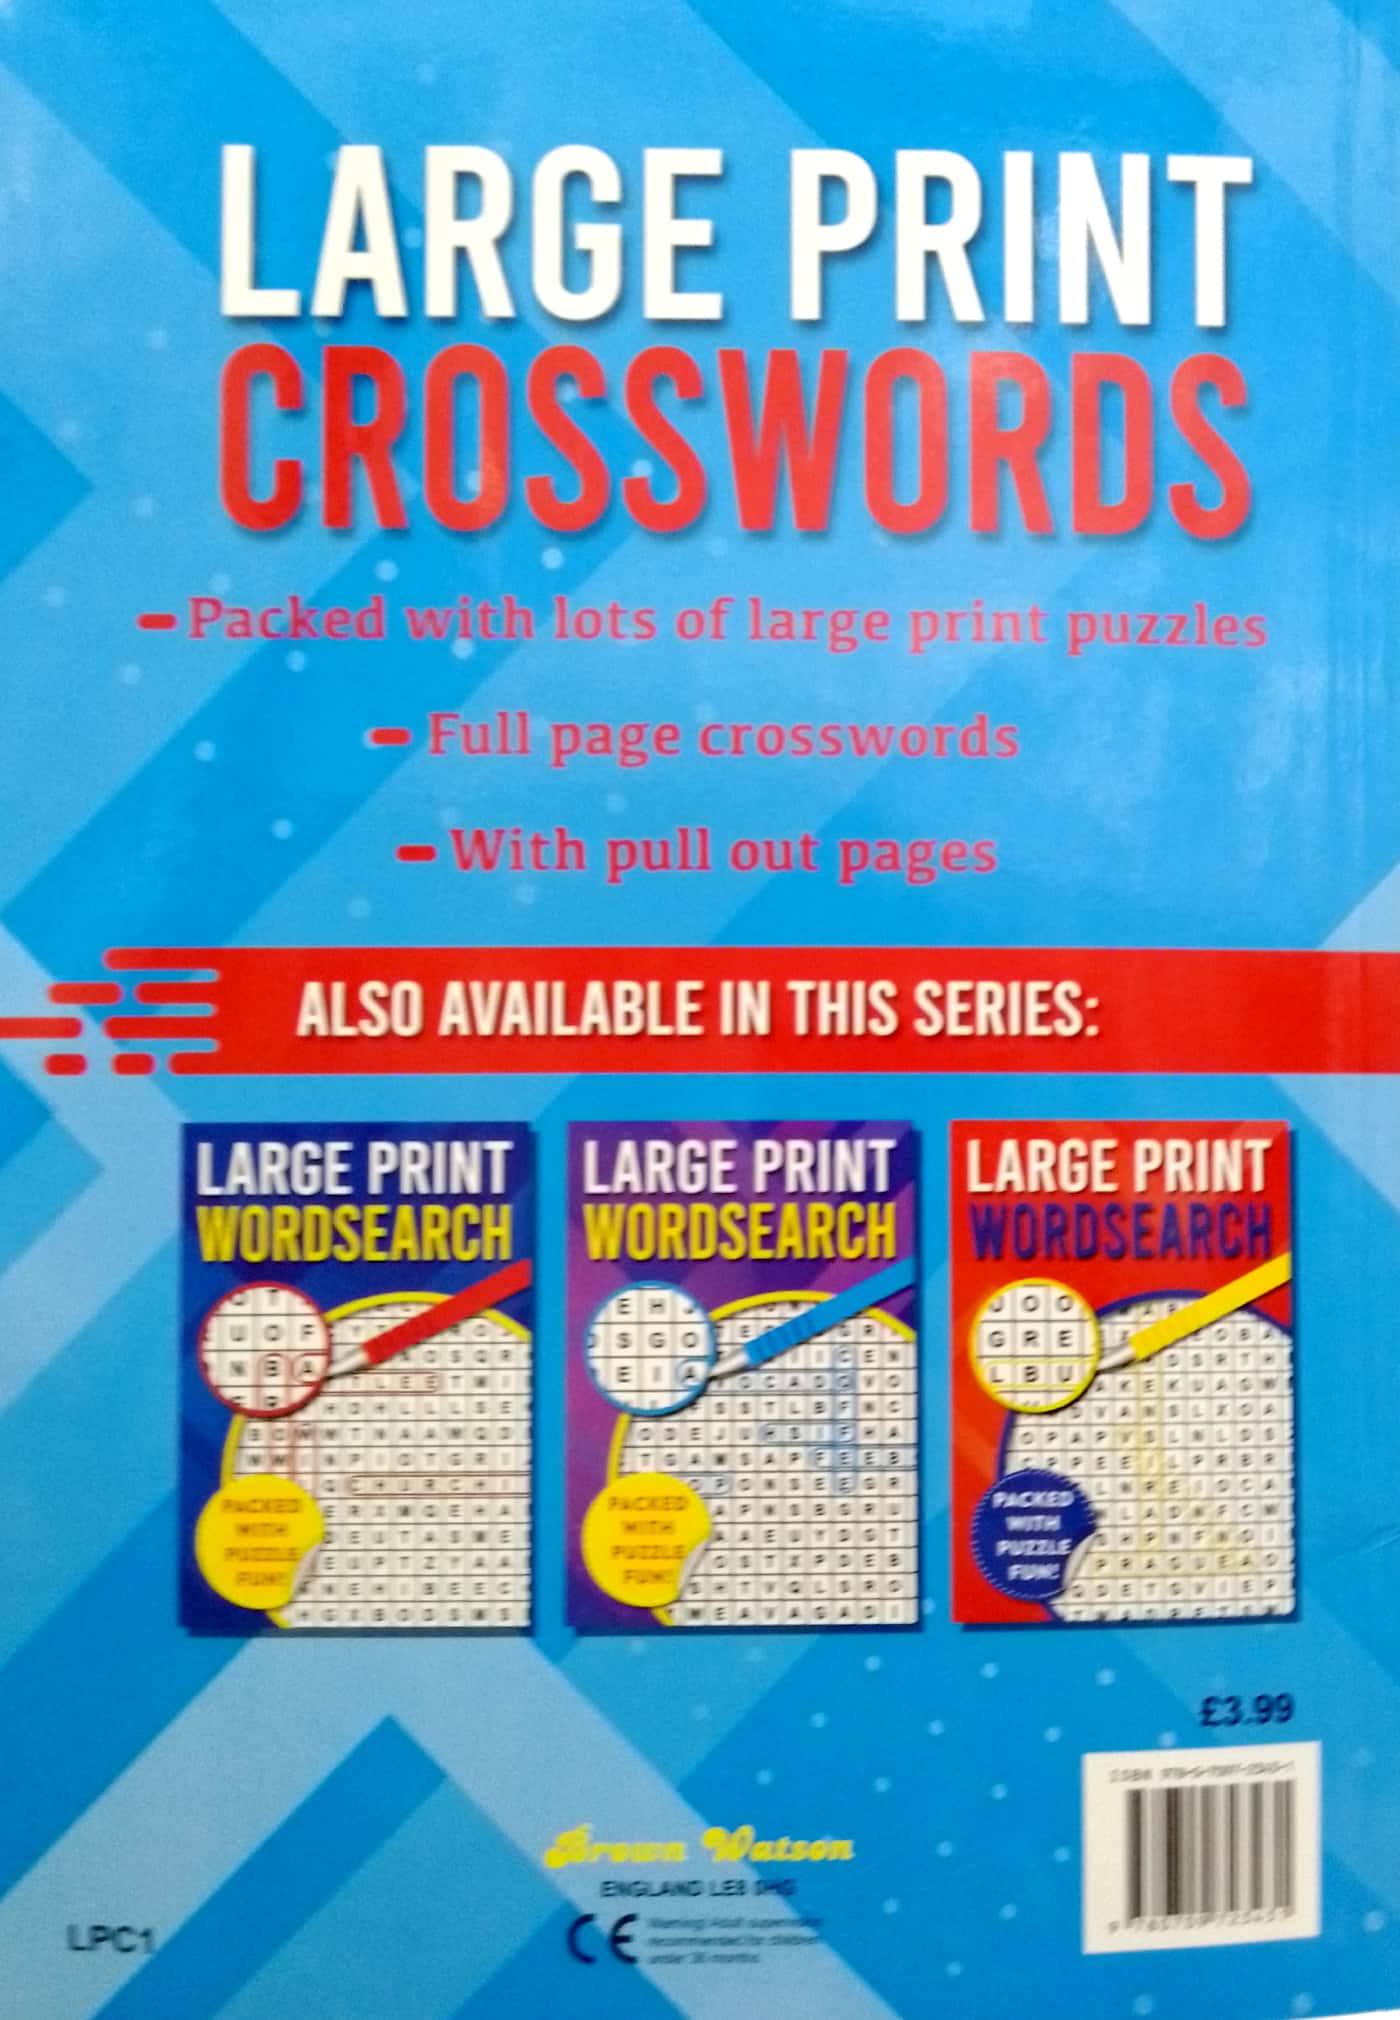 Large Print Words Search